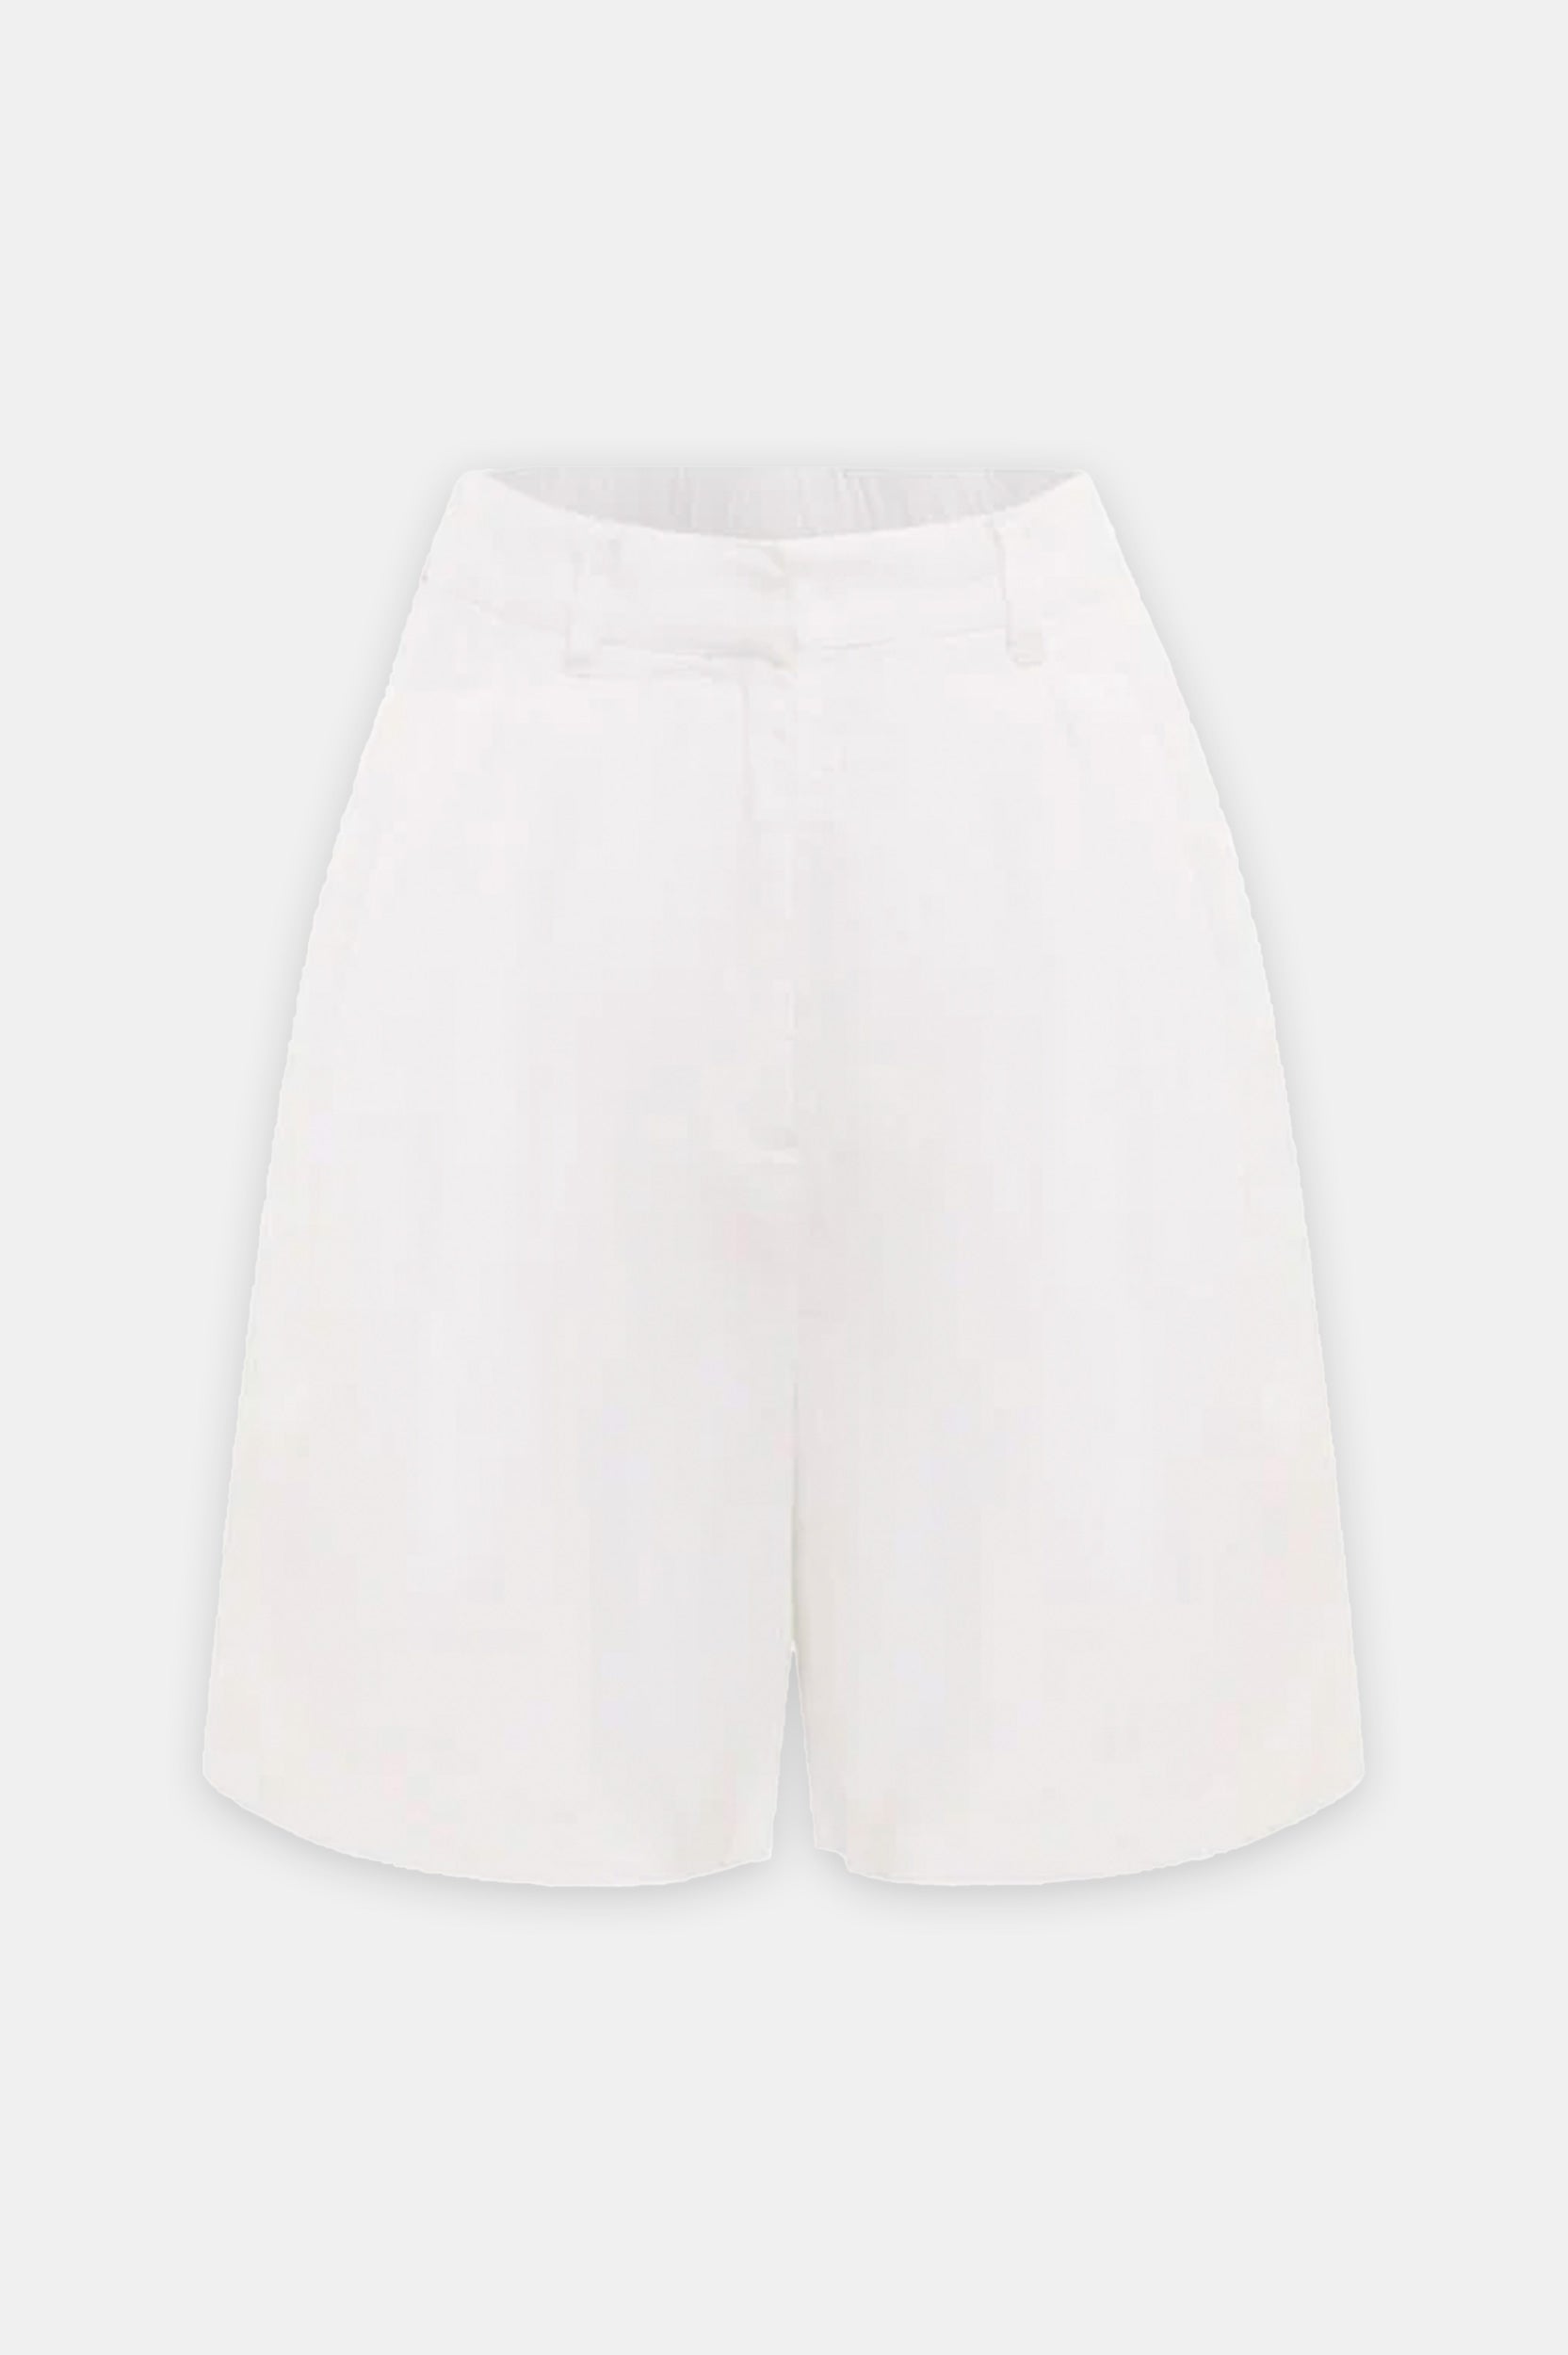 Marchello Short in Ivory